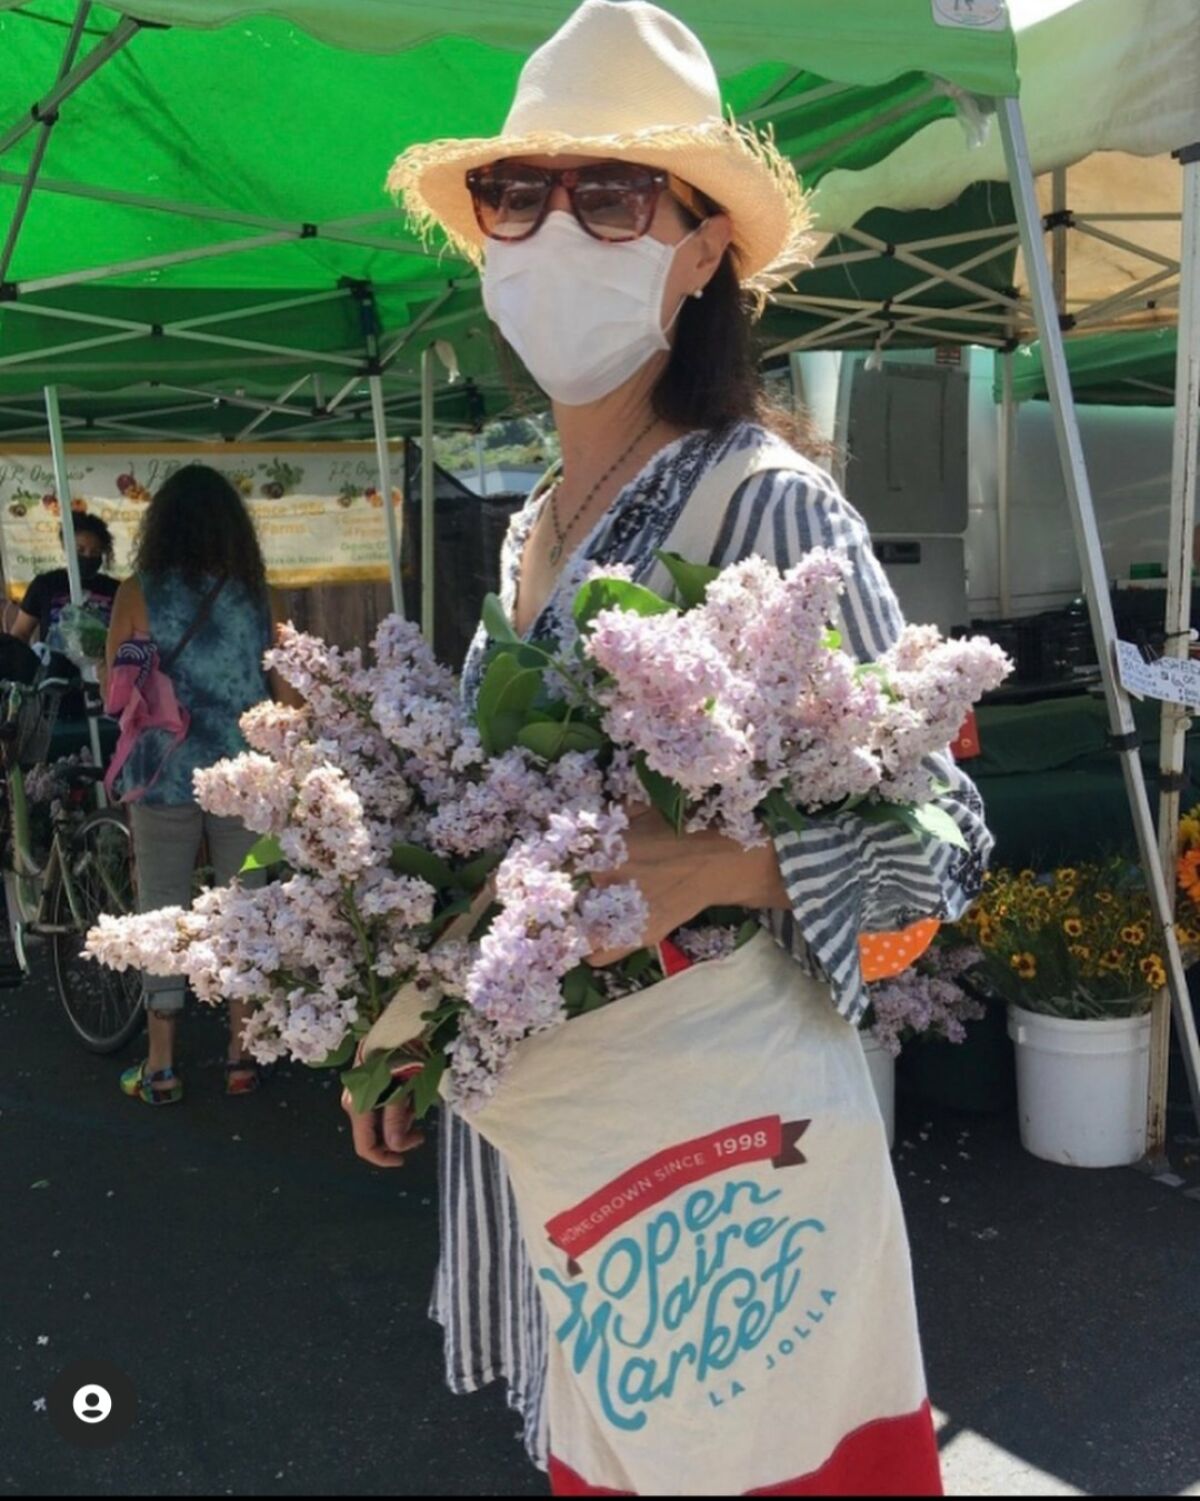 Masked guests can pick up produce, lunch, crafts or flowers from the La Jolla Open Aire Market.